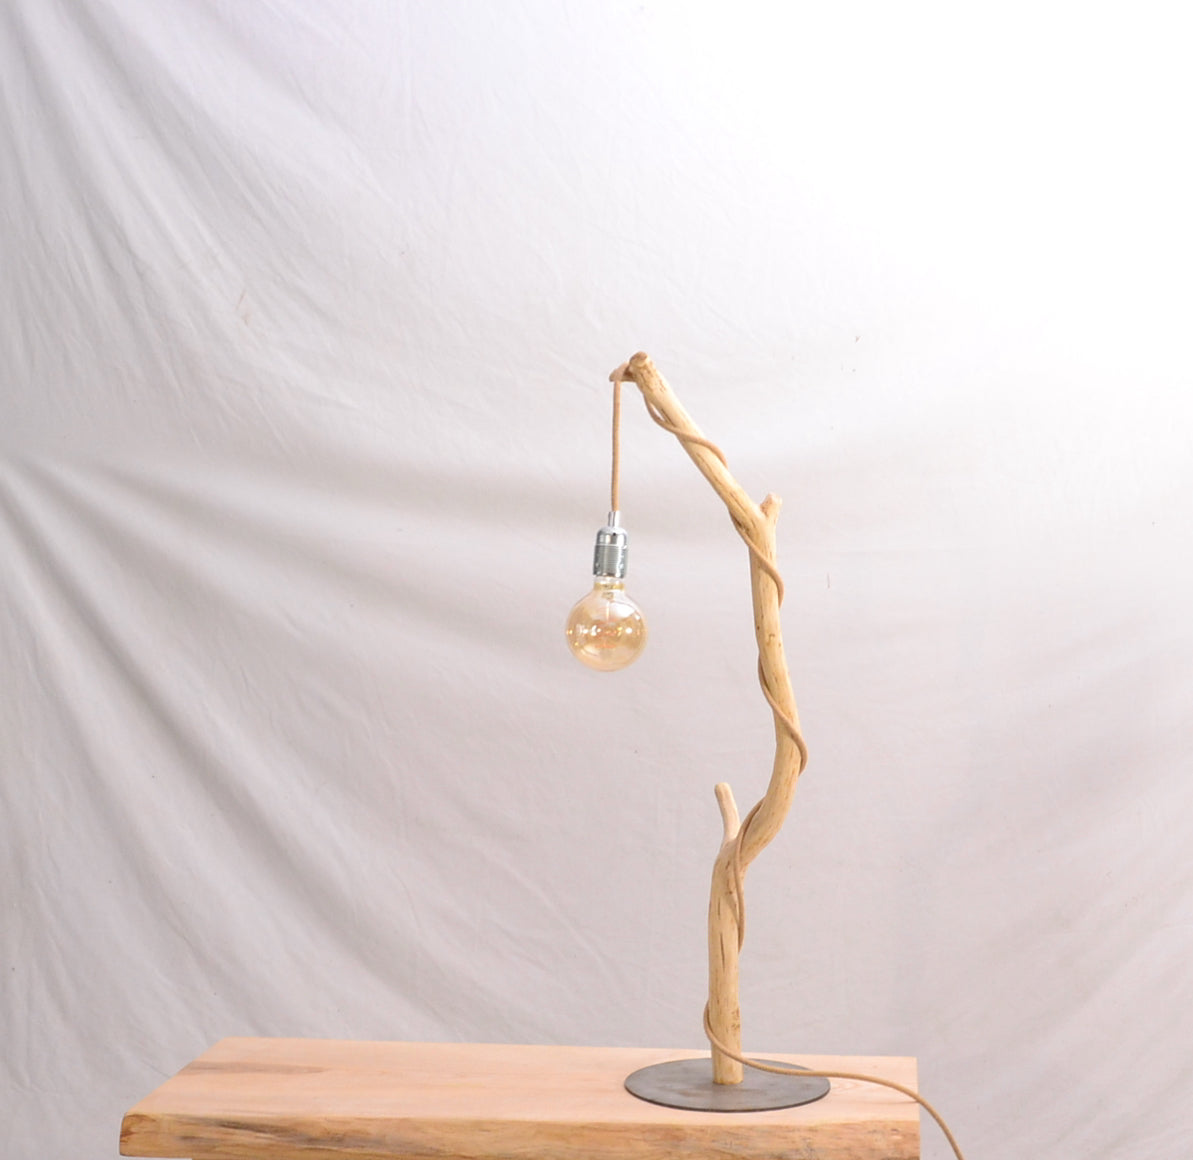 Wood table lamp with a beautiful oak branch, steel base